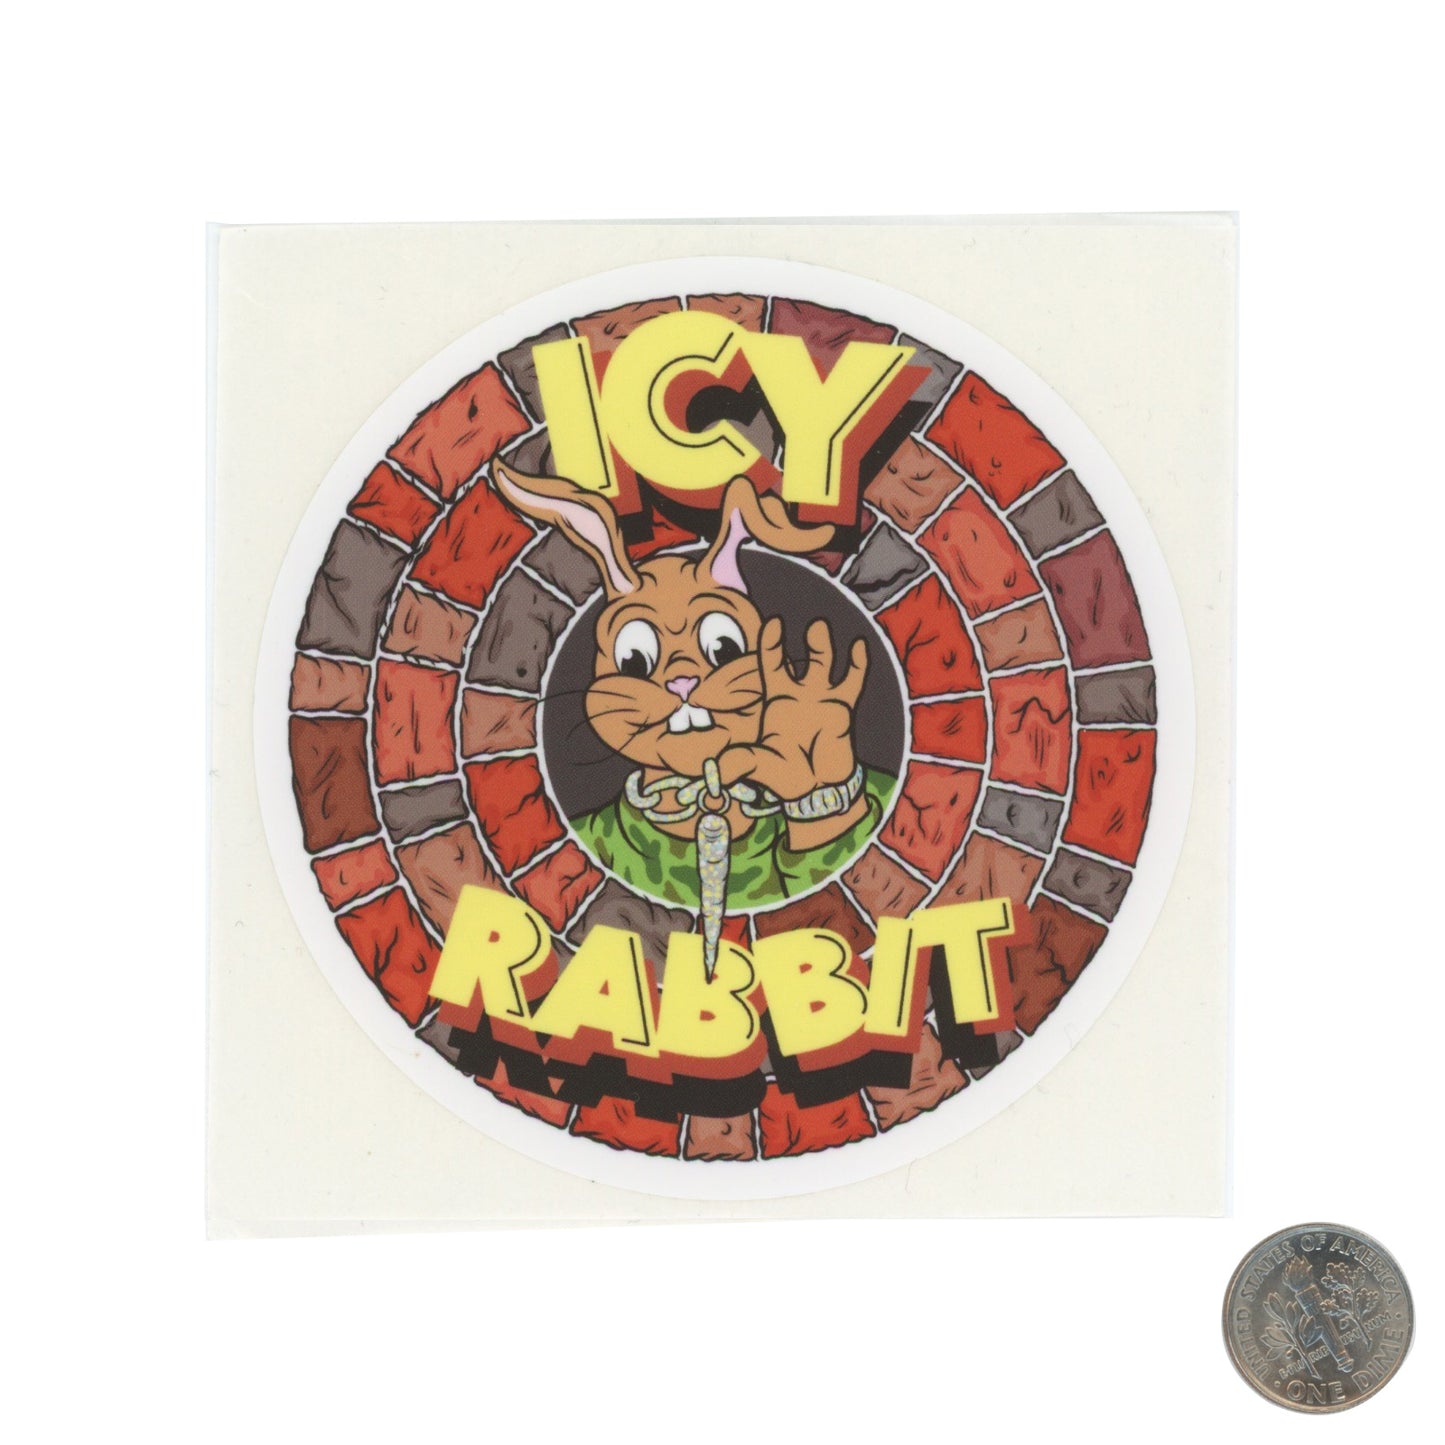 Icy Rabbit with Carrot Chain Sticker with dime